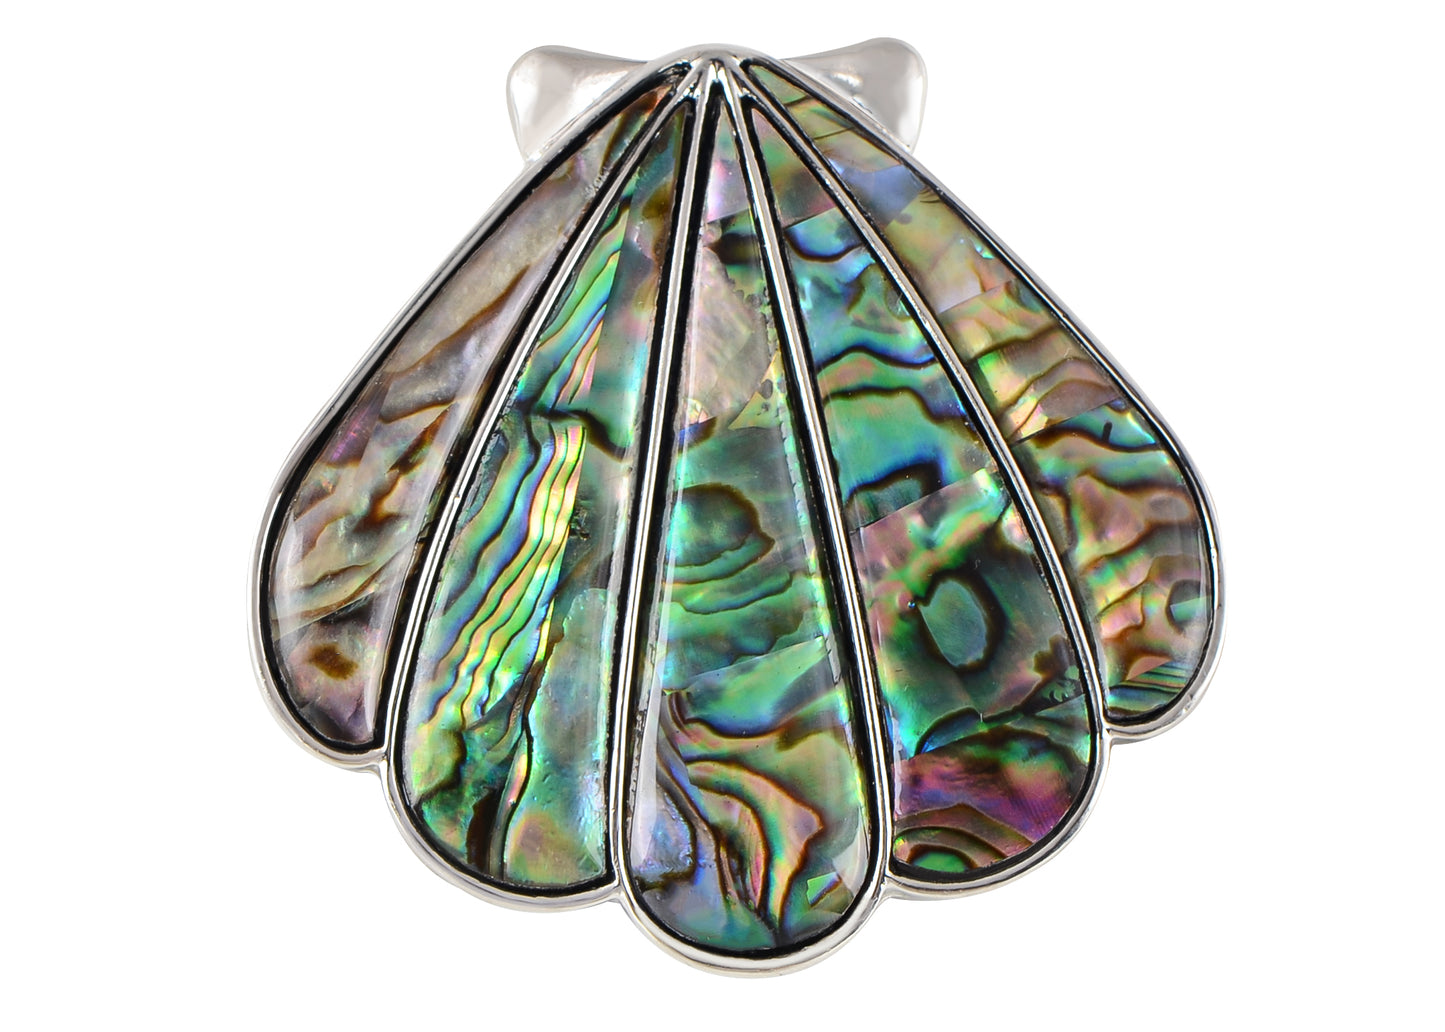 Alilang Silvery Tone Abalone Shell Scalloped Ocean Sea Brooch Pin Pendant Custom Jewelry Gifts for Women Teen Girls